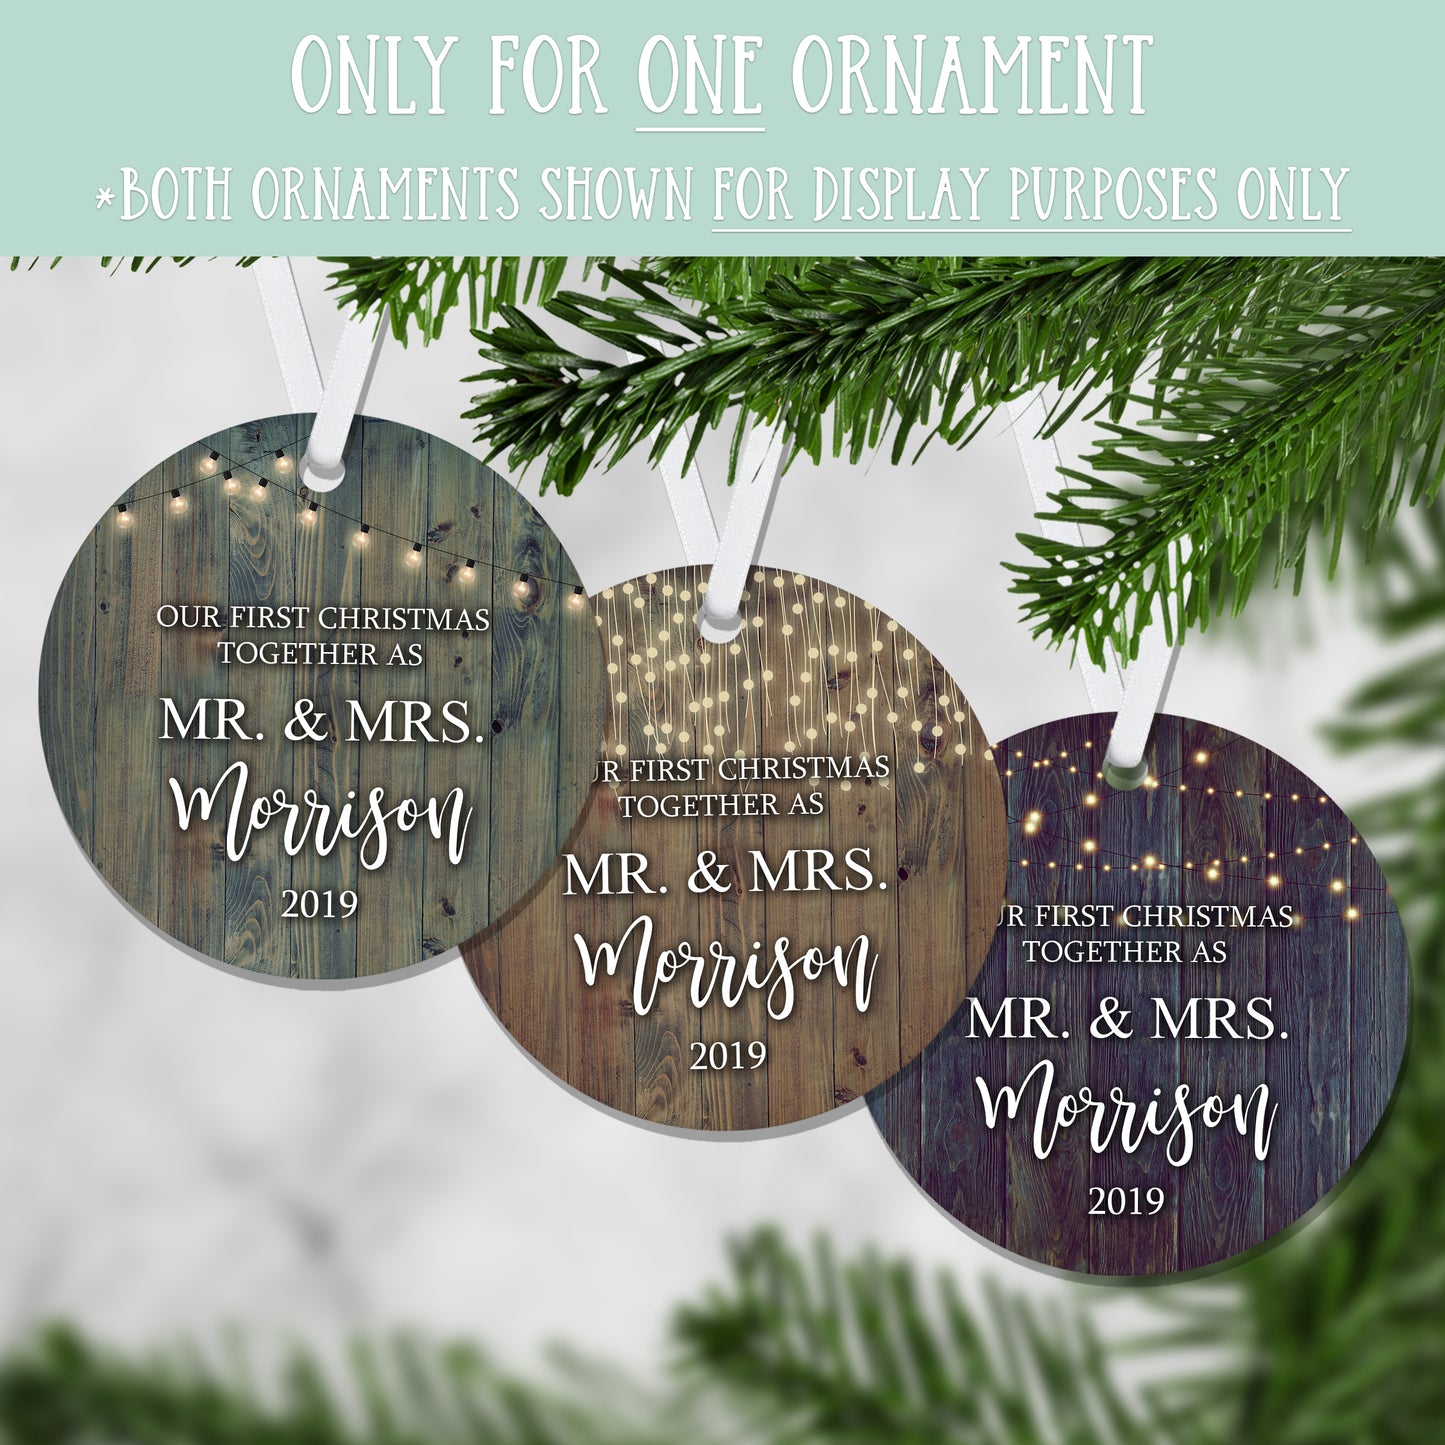 Personalized Our 1st Christmas As Mr. & Mrs. Ornament - RO0101-RO0114 | S'Berry Boutique